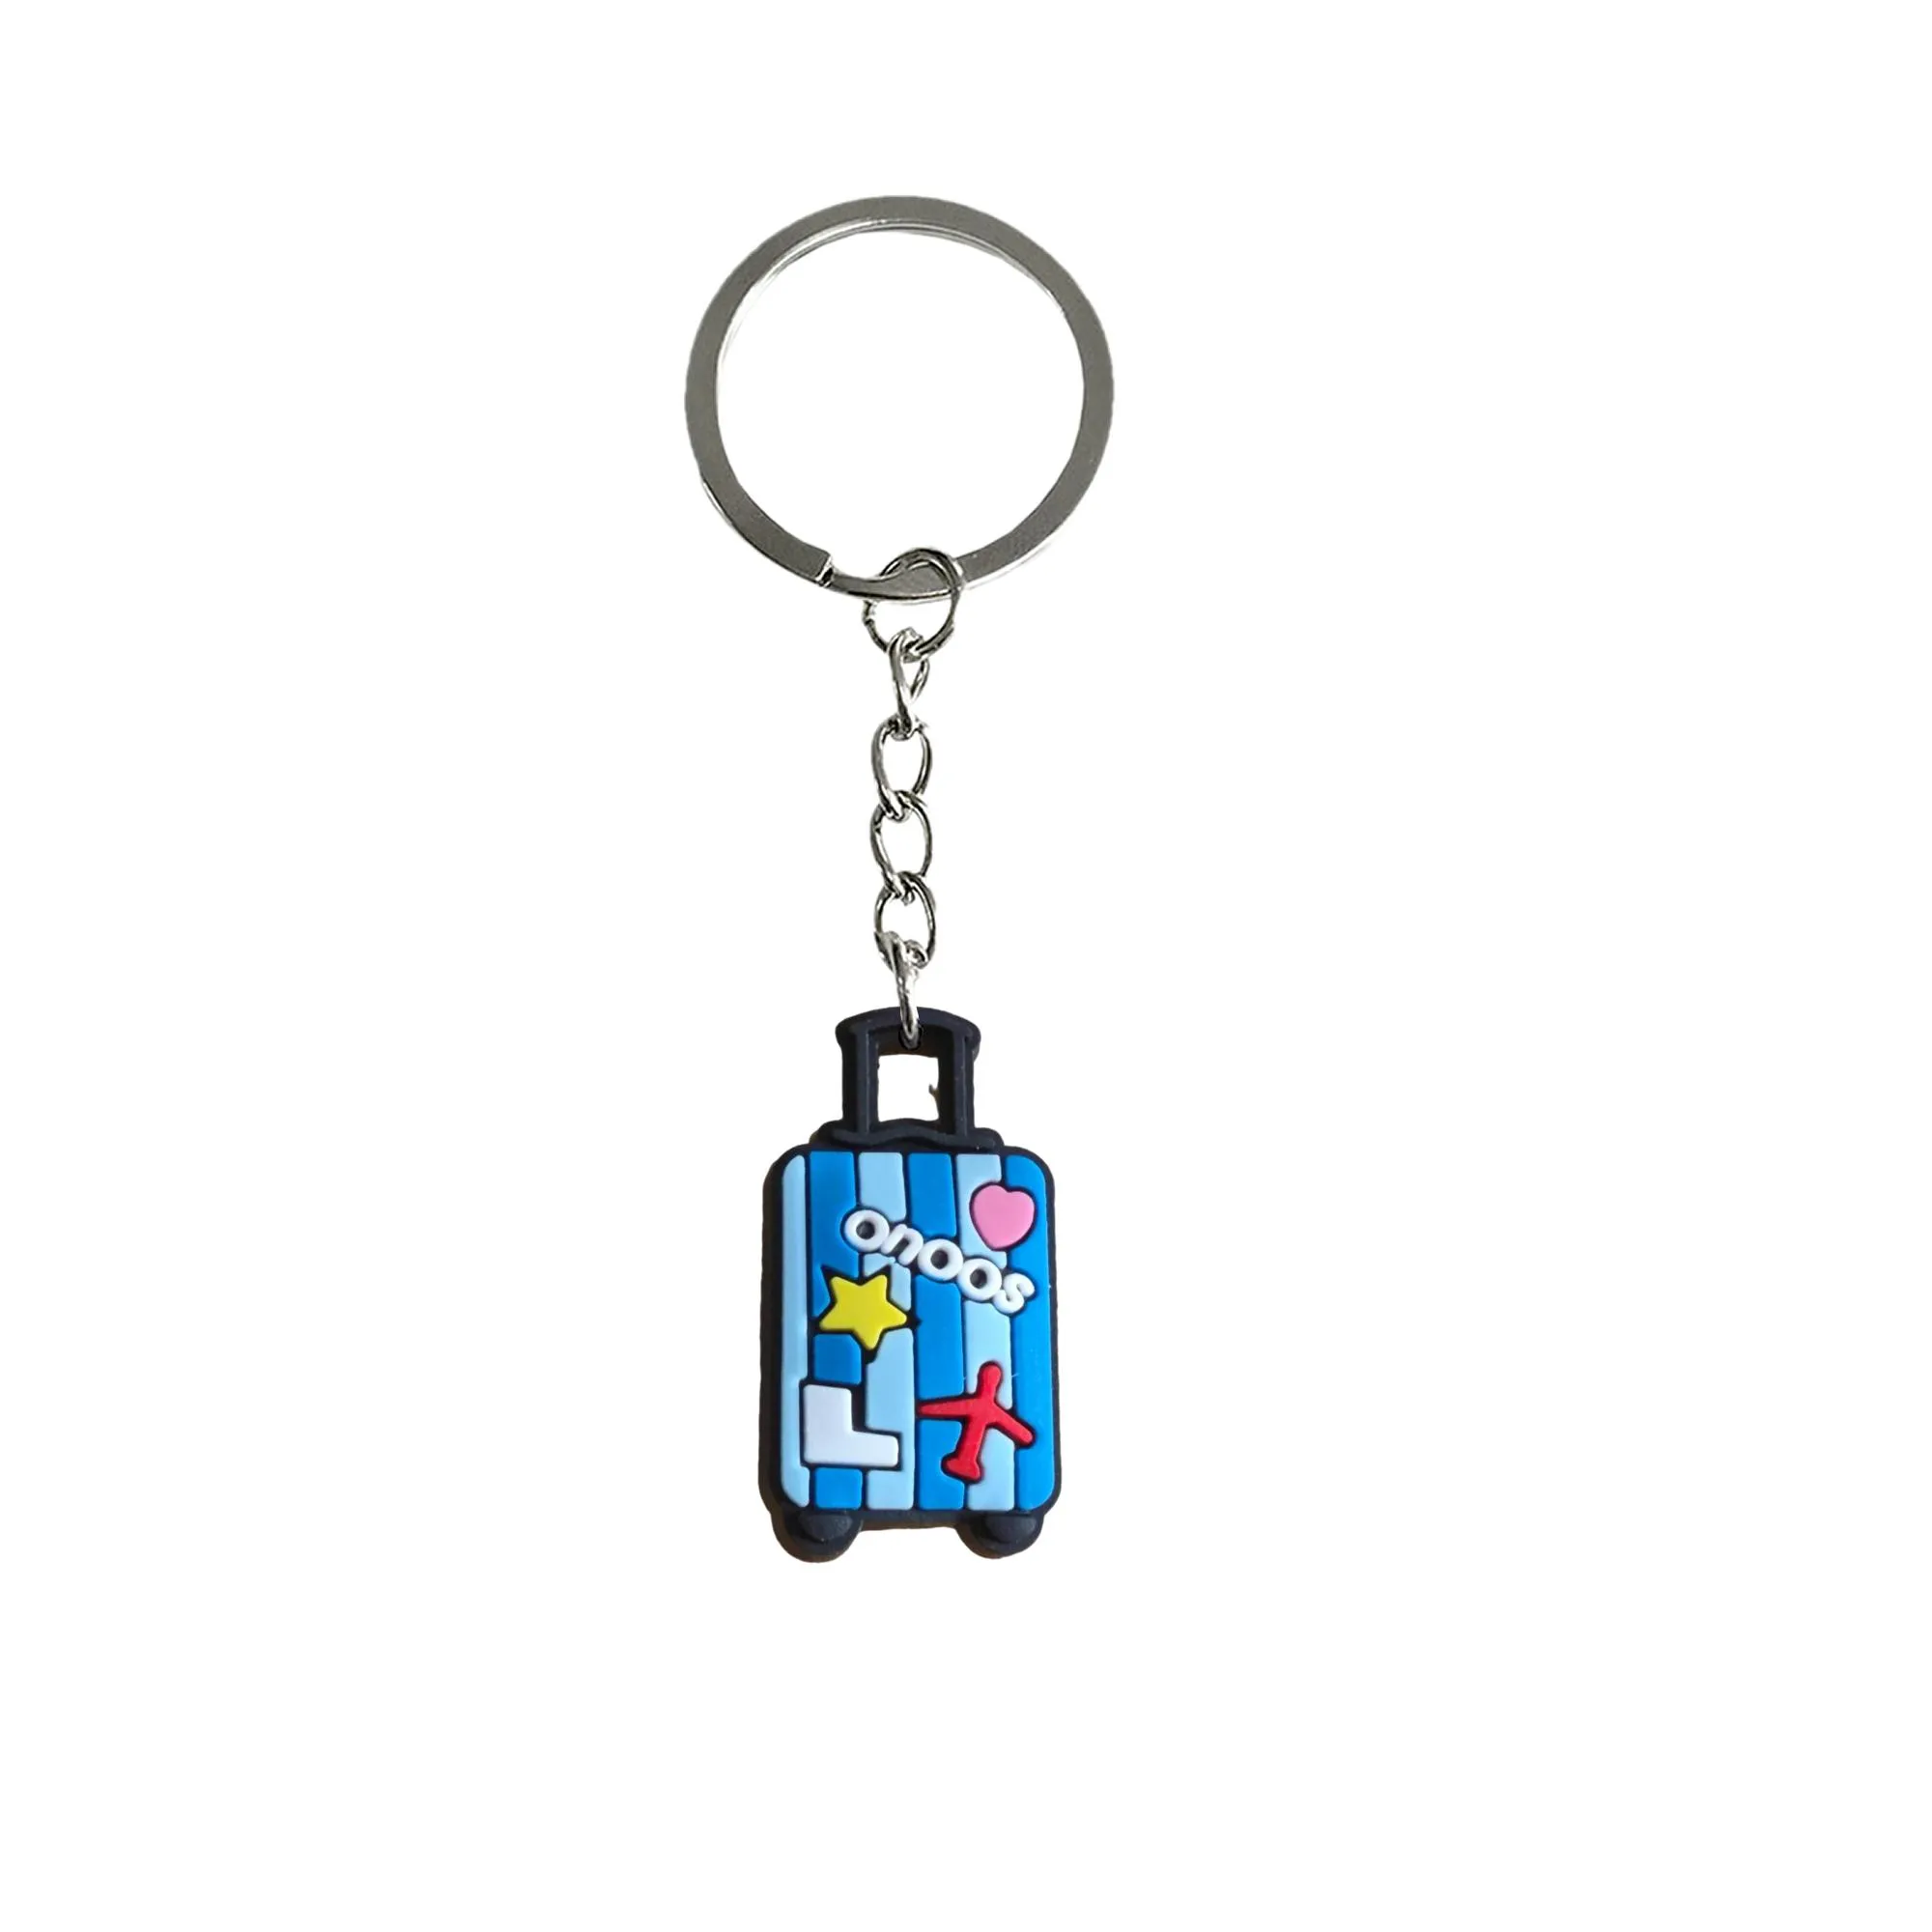 luggage and keychain keyring for men boys keychains key chain party favors gift suitable schoolbag backpack car charms ring